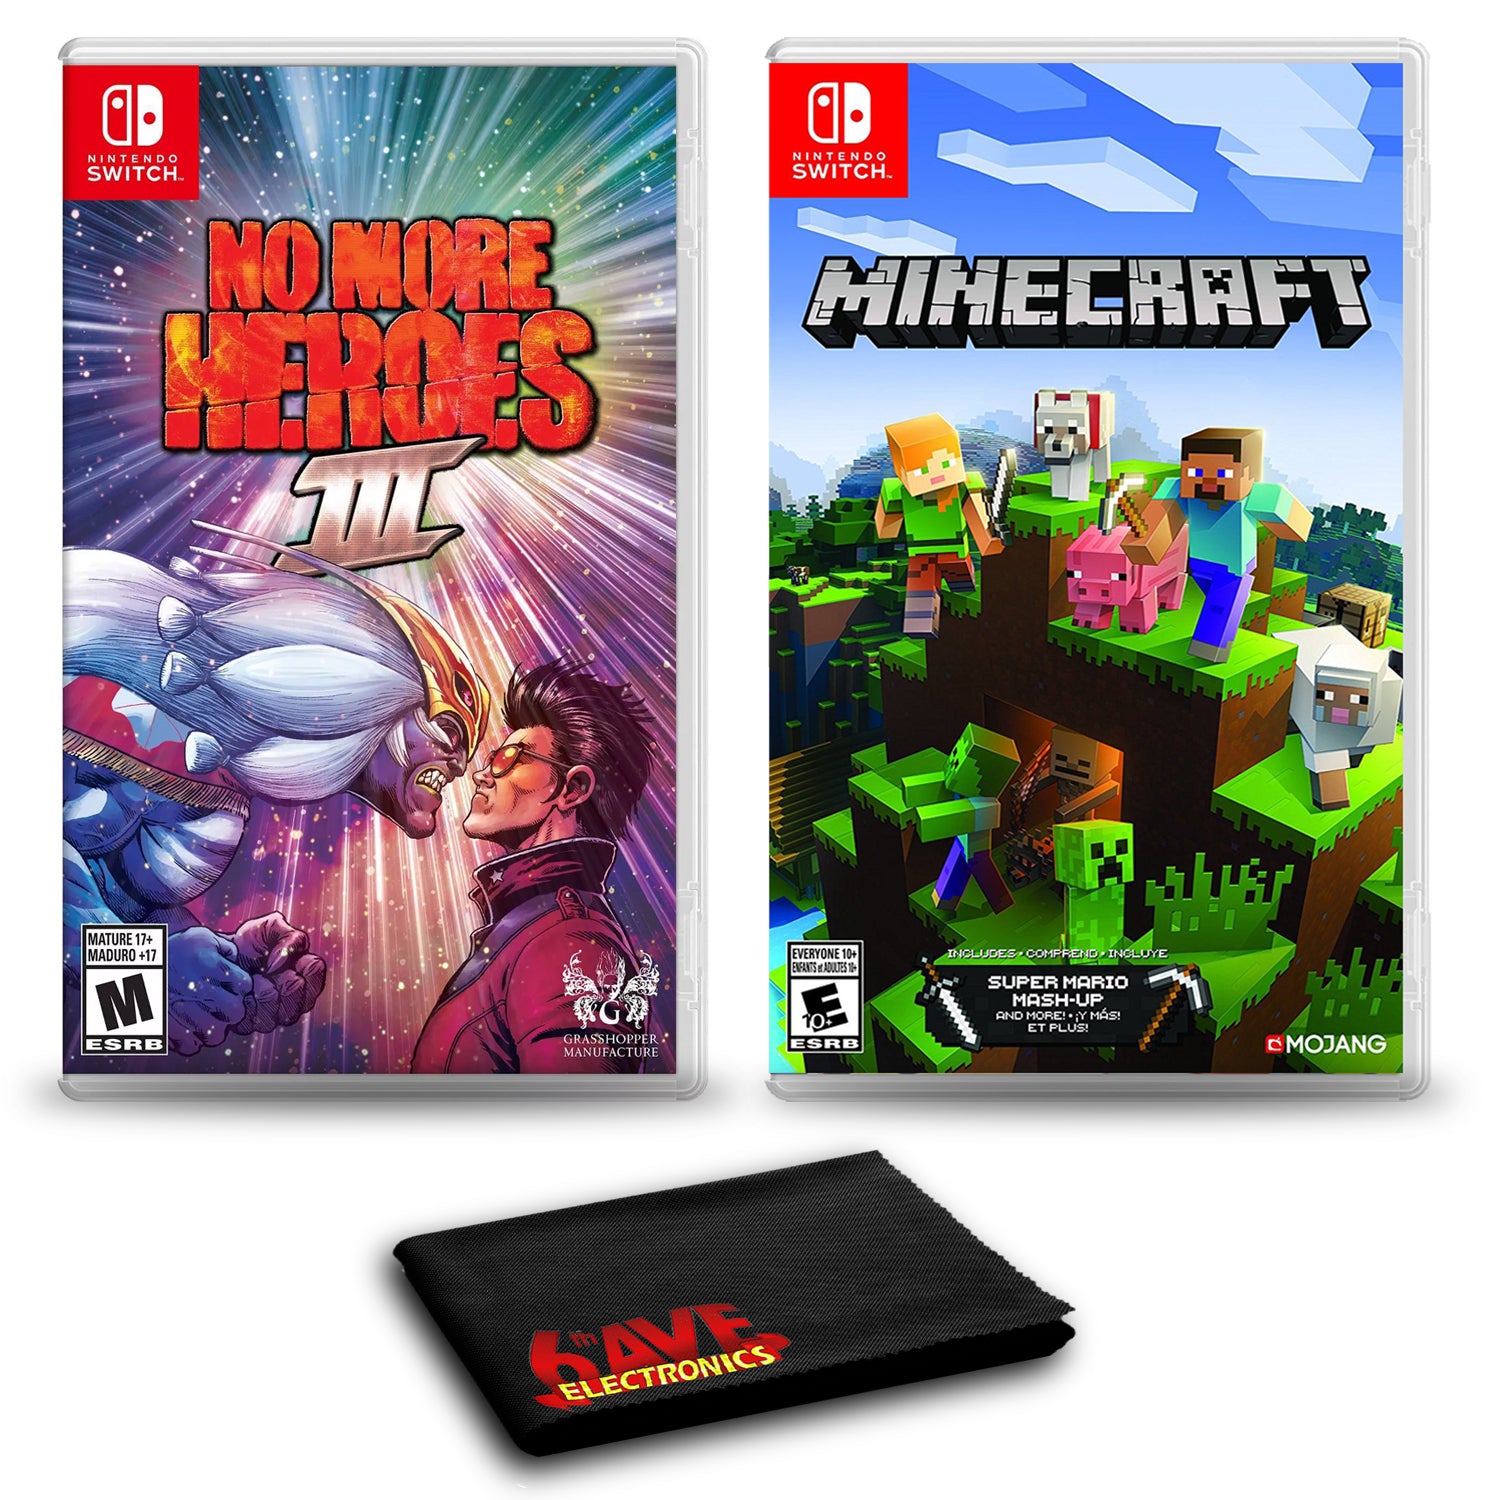 No More Heroes 3 Bundle with Minecraft - Nintendo Switch